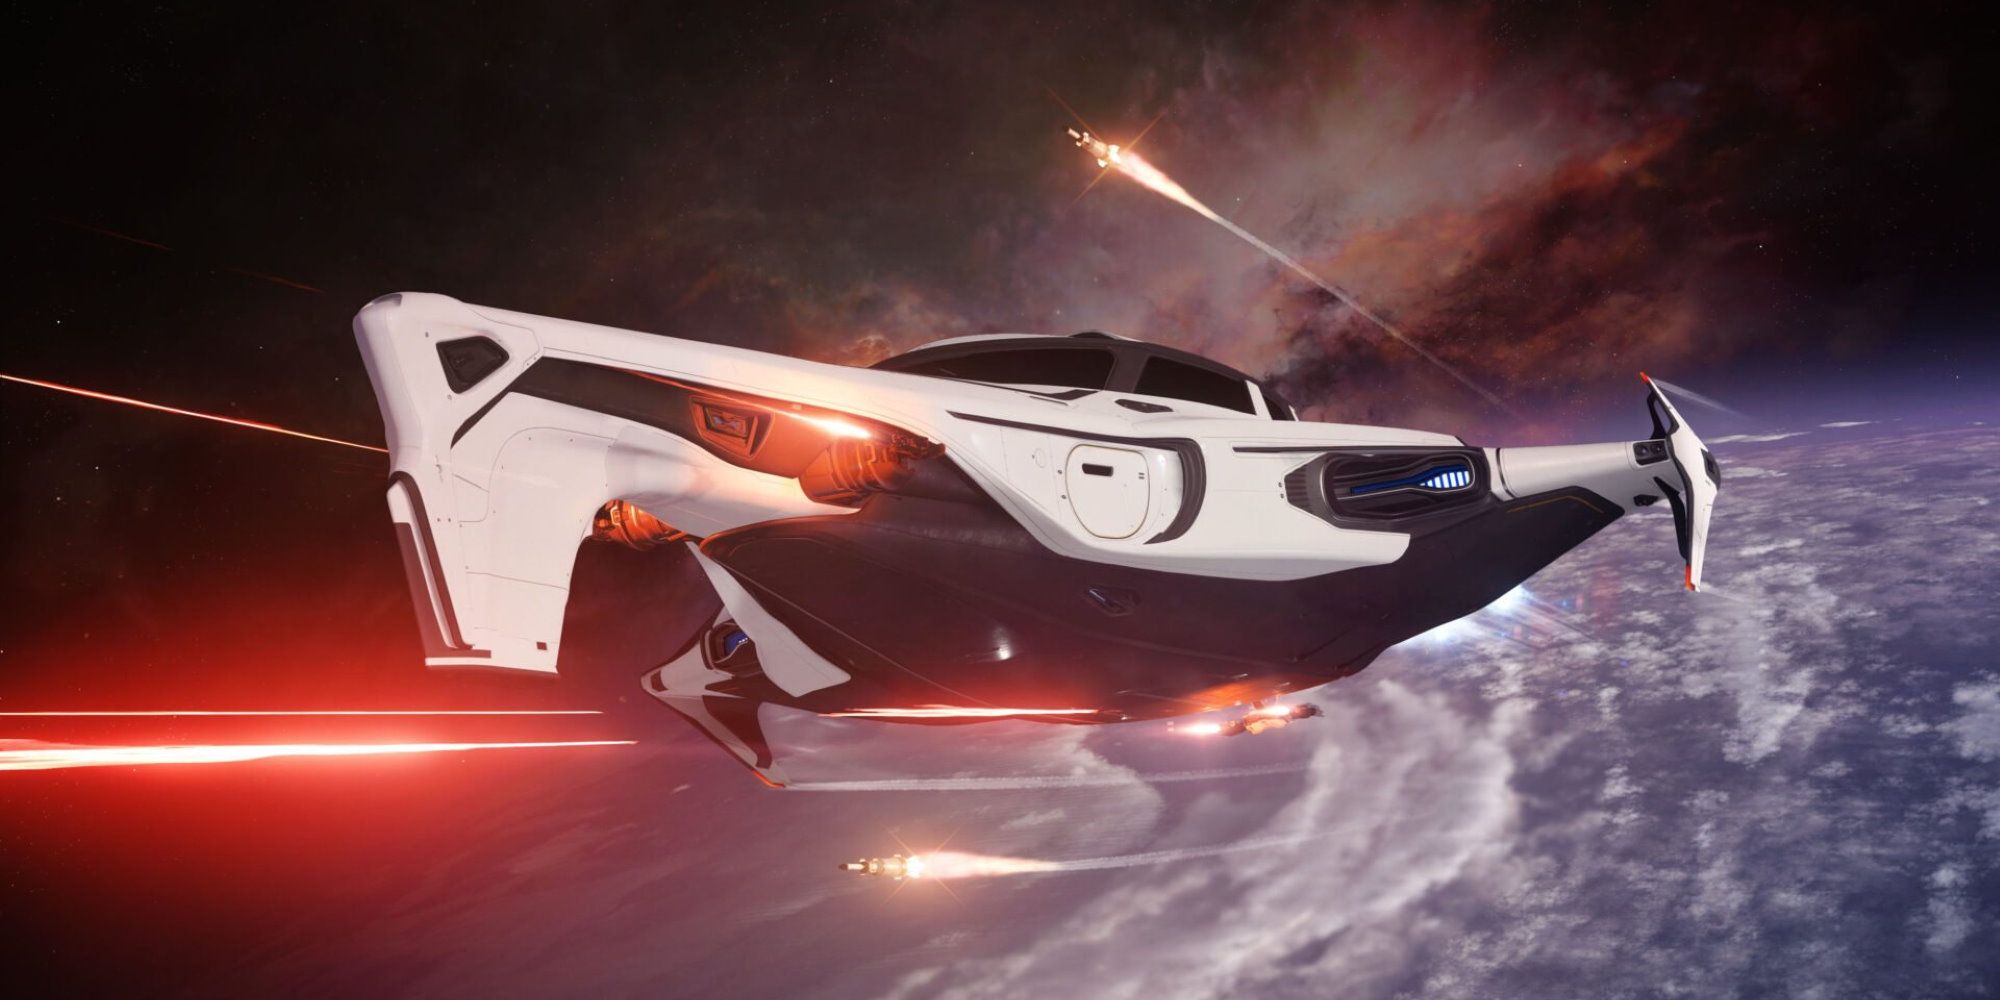 New Star Citizen ship costs $675, more than a PS4 and Xbox COMBINED